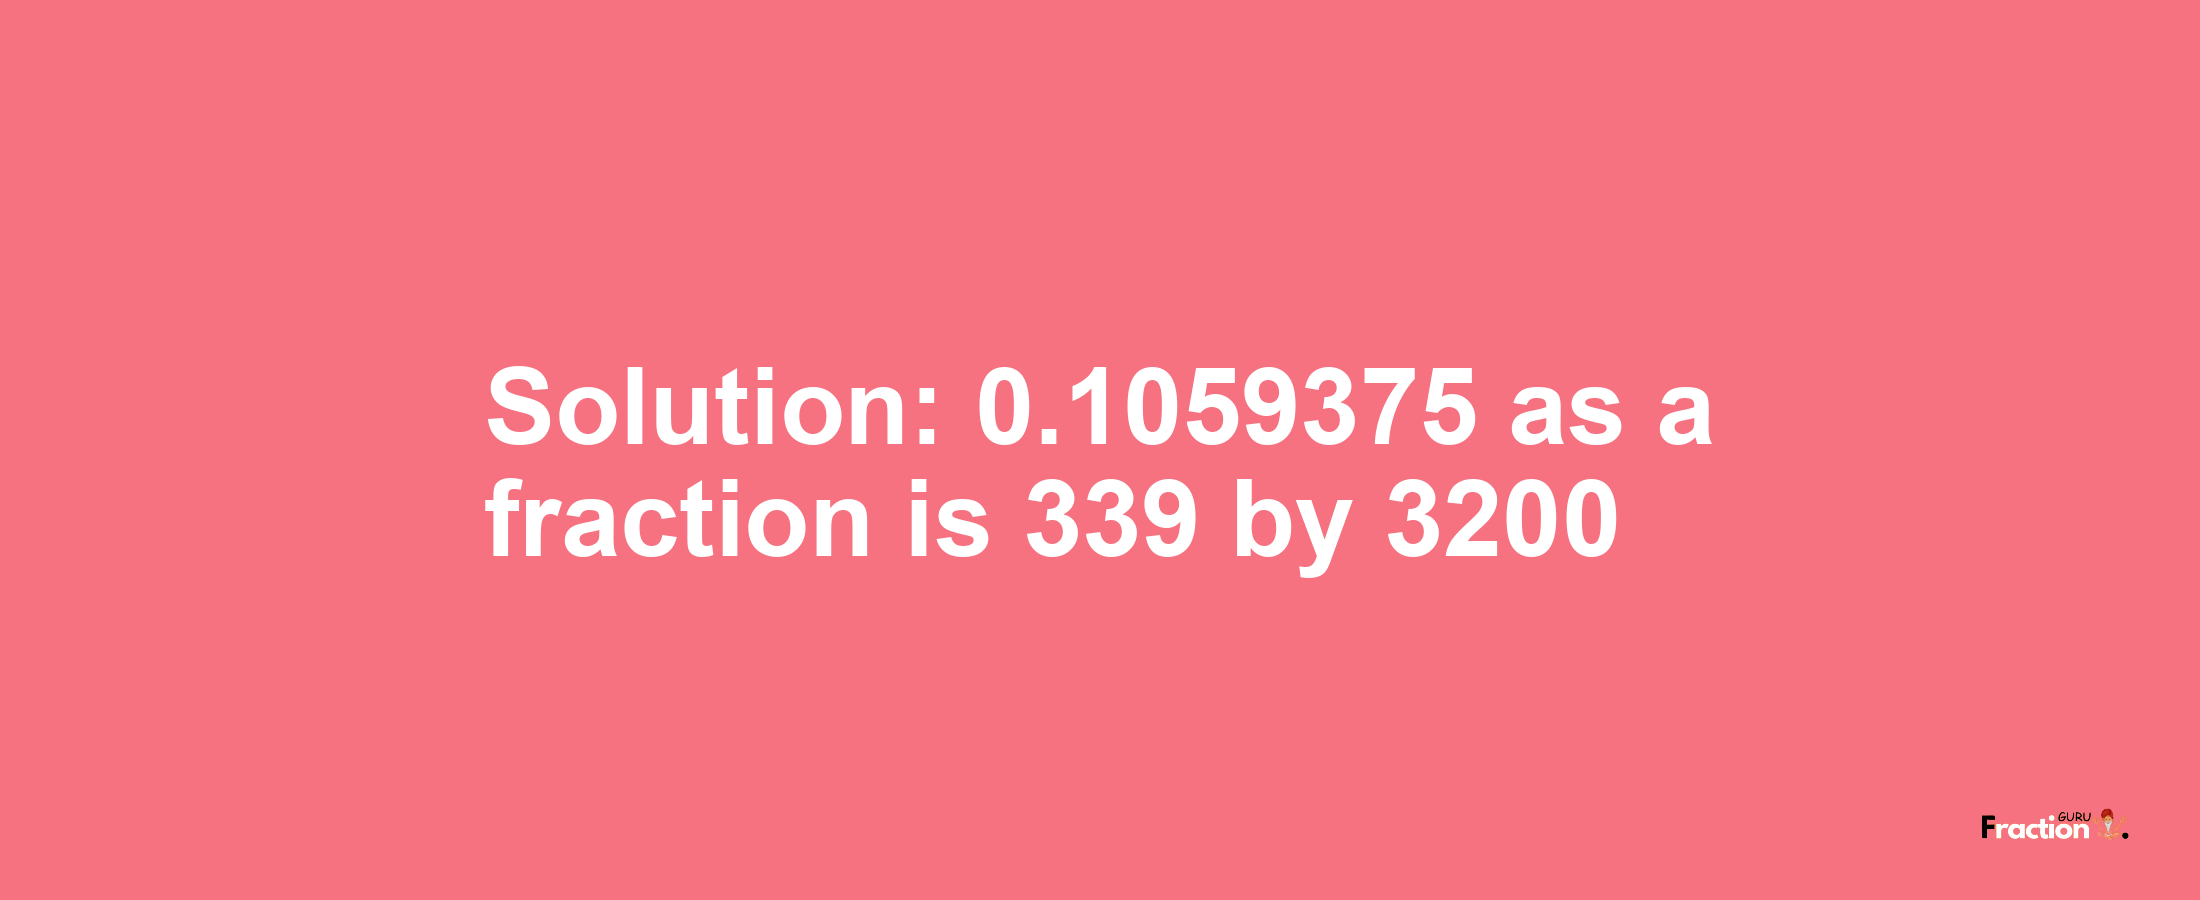 Solution:0.1059375 as a fraction is 339/3200